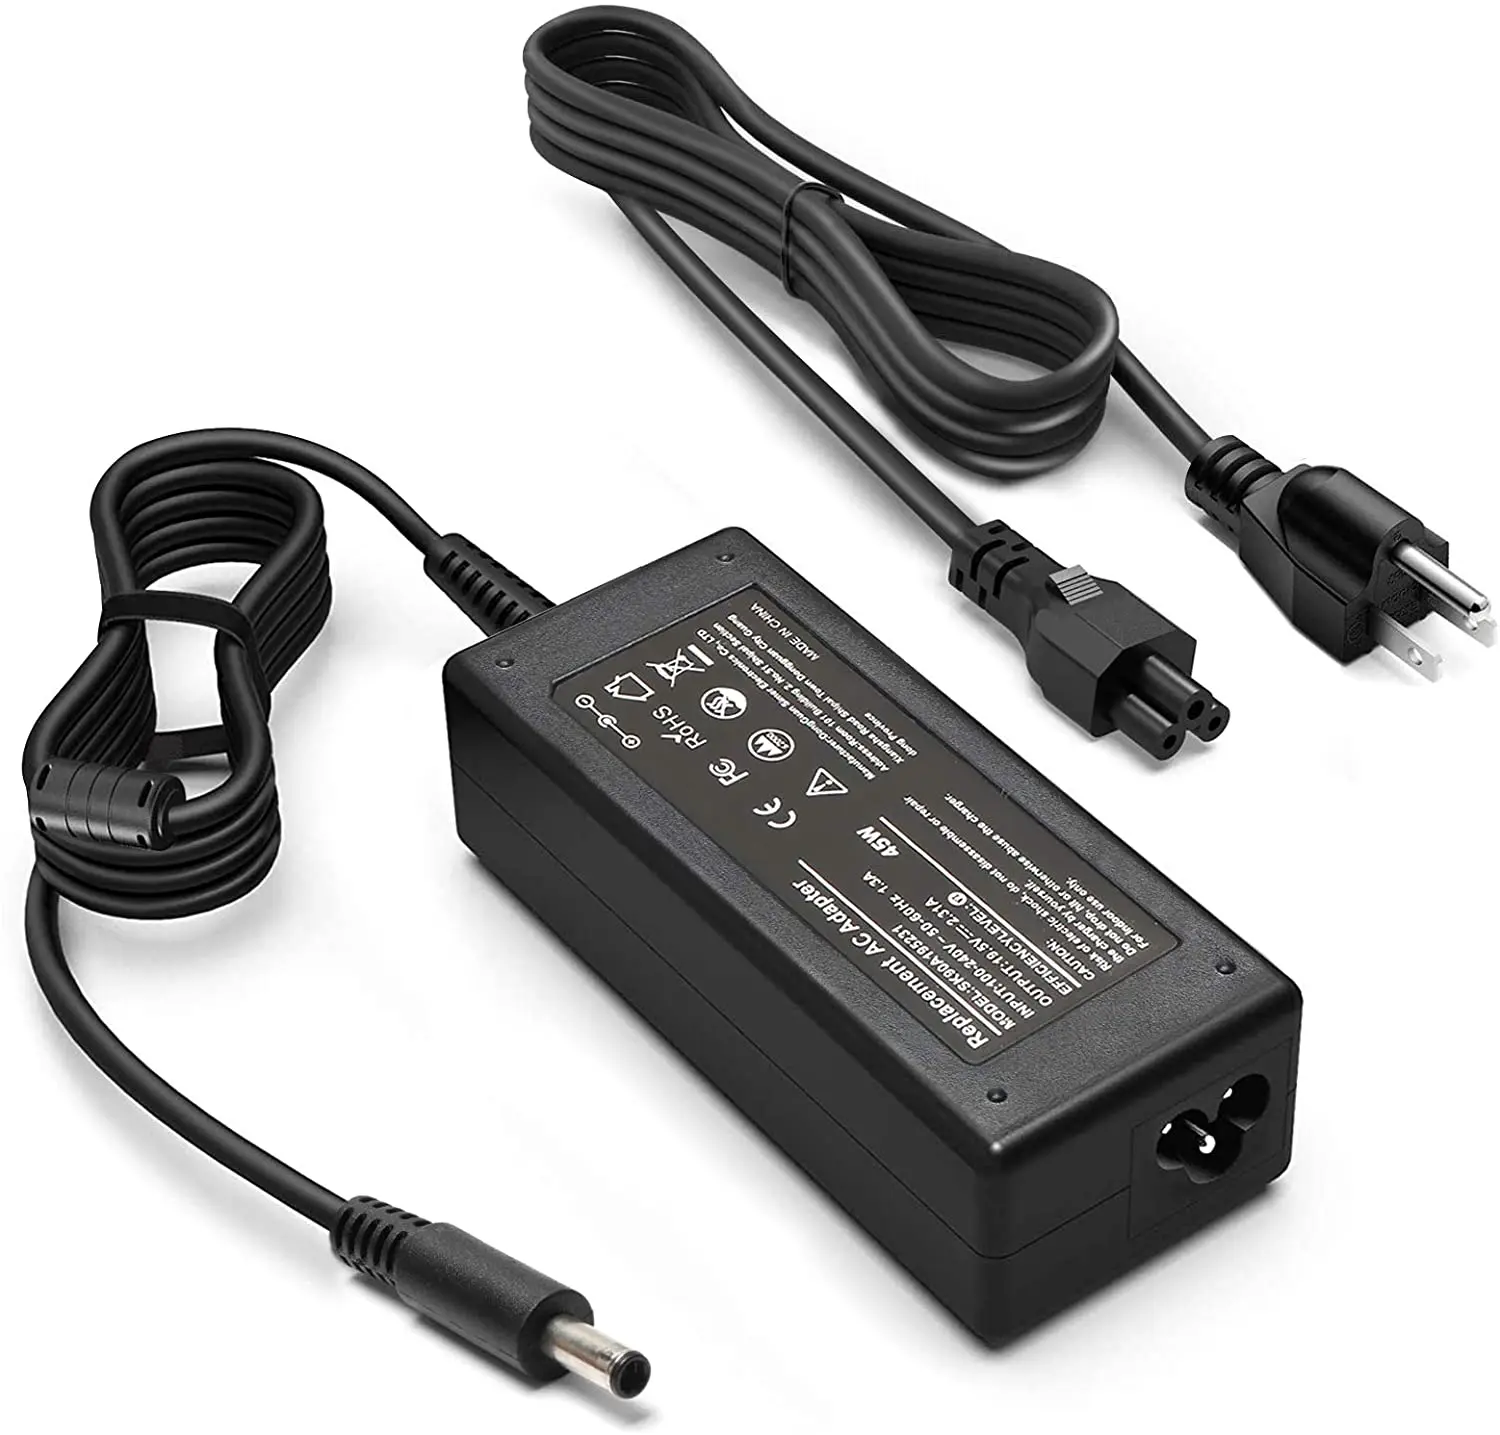 Best Selling Products 45w Laptop Charger For Dell Inspiron 11 13 14 17 15  3000 5000 7000 Series - Buy   Laptop Charger,45w Power  Adapter,45w Laptop Charger For Dell Product on 